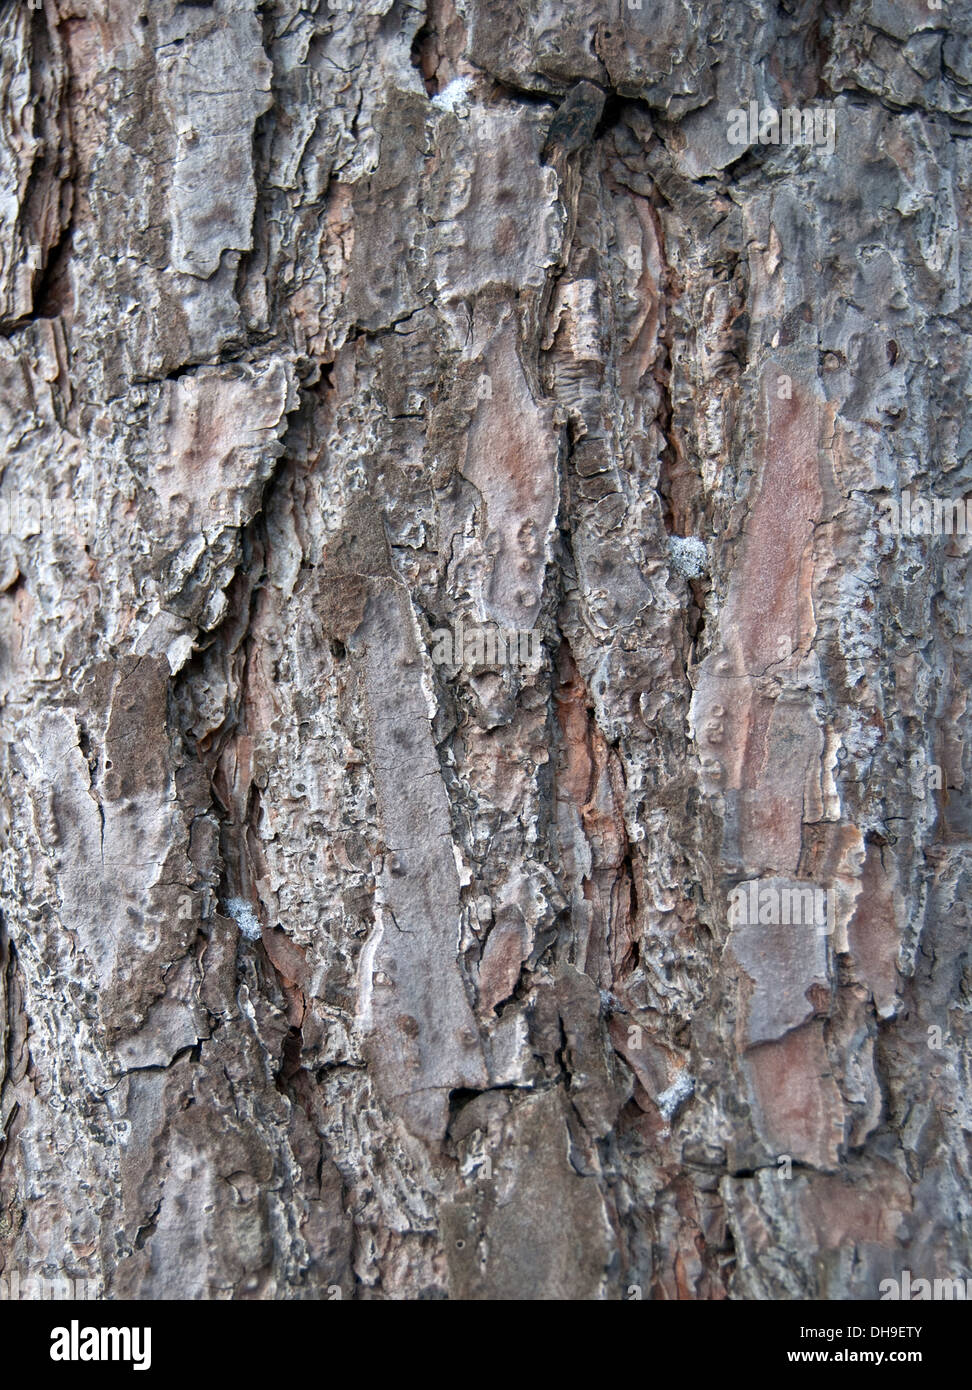 wooden texture. Crimean pine tree, close-up view Stock Photo